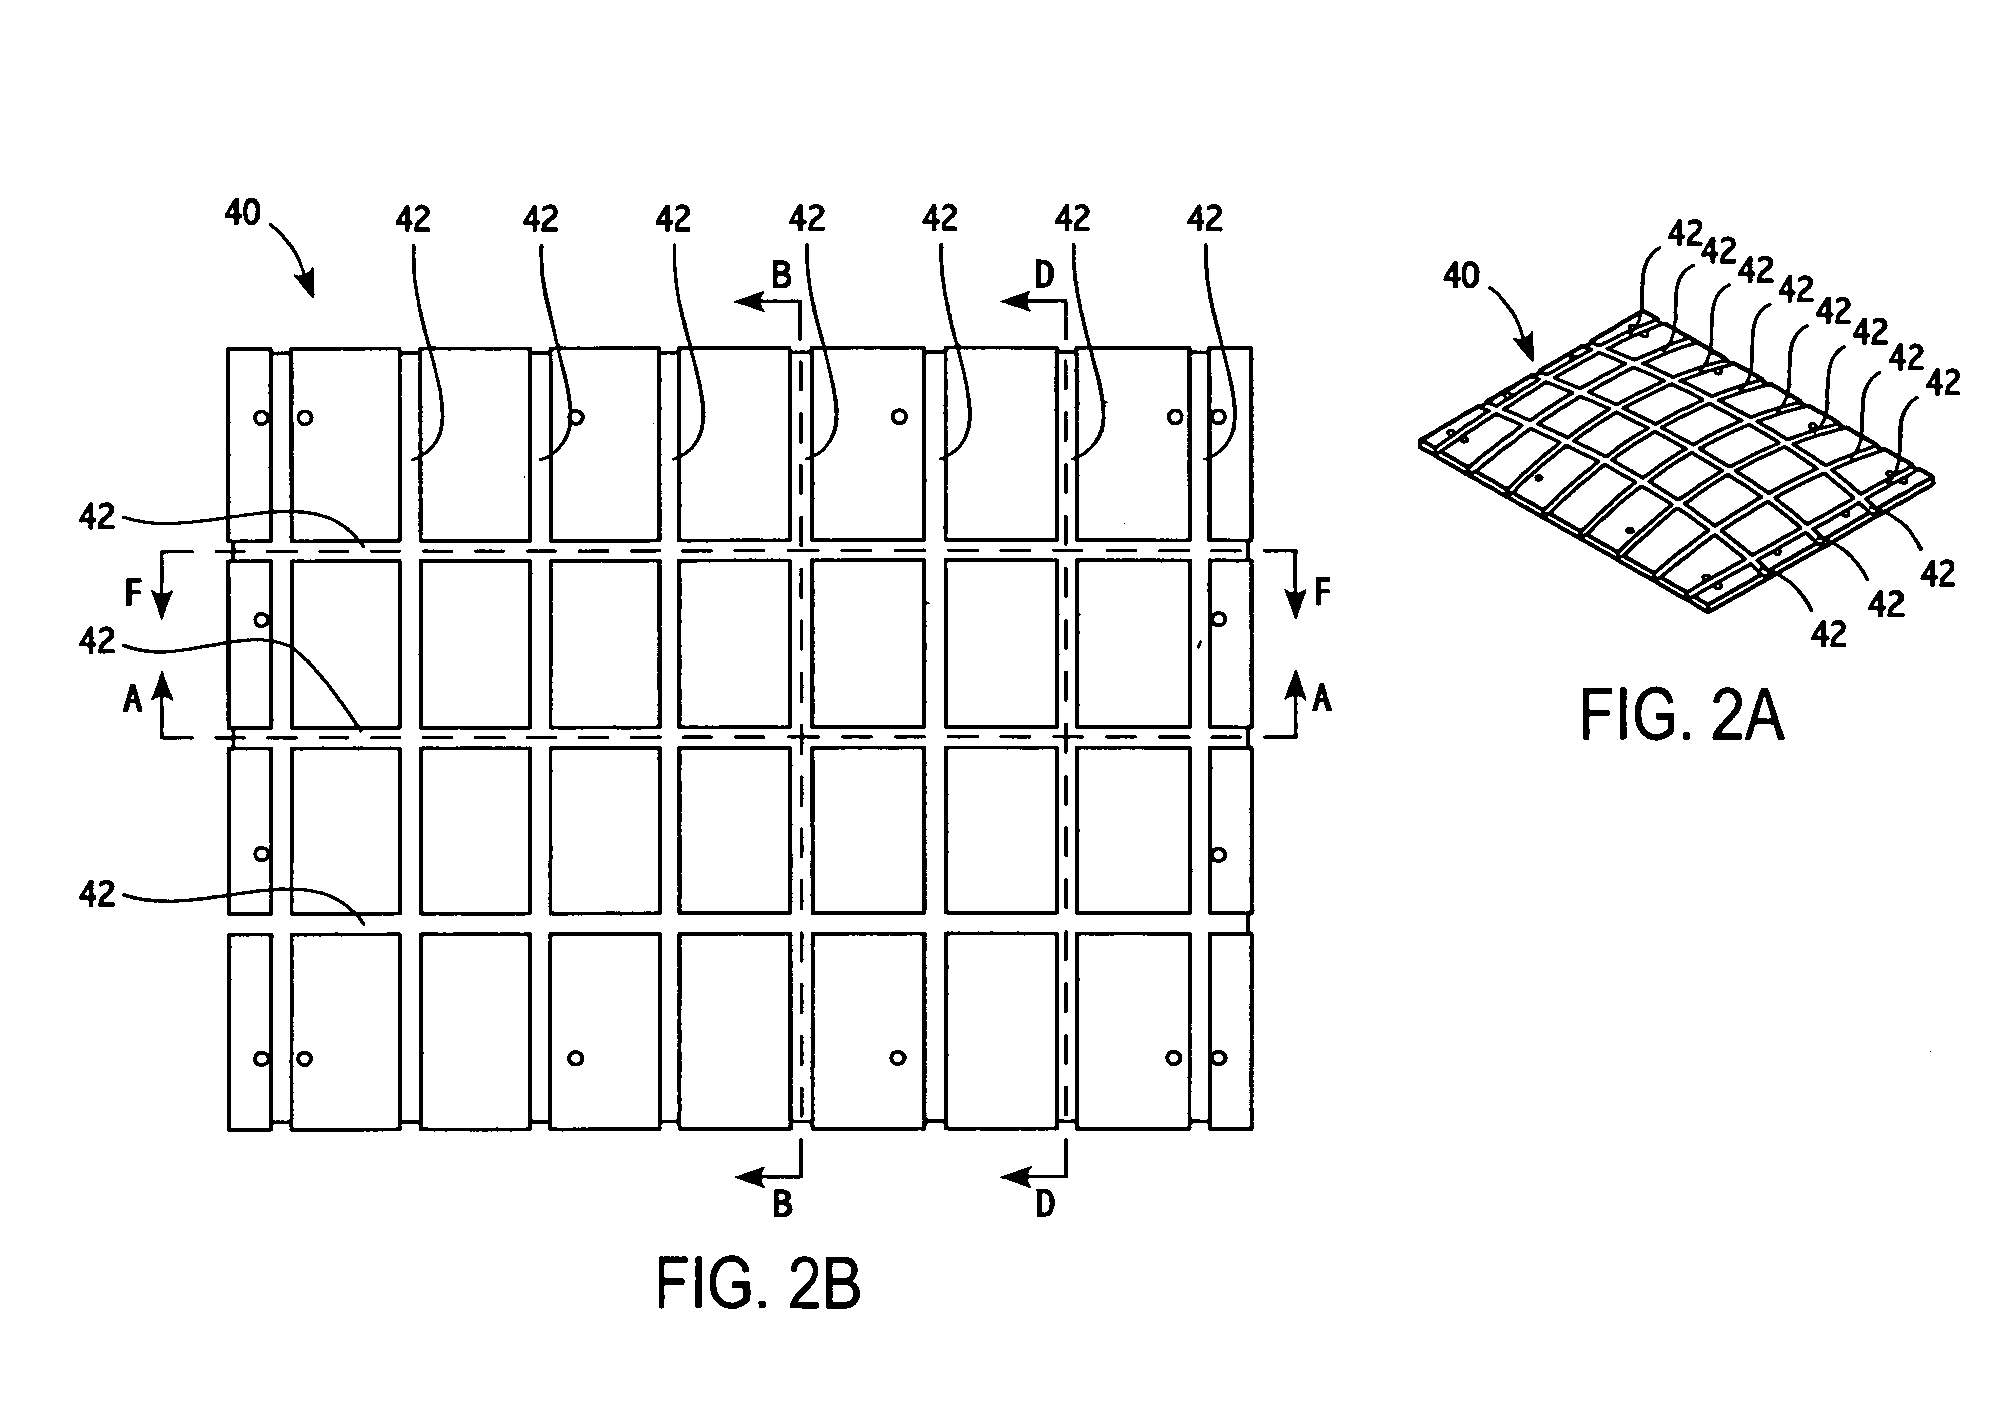 Method and apparatus for forming a bale having substantially flat upper and lower surfaces